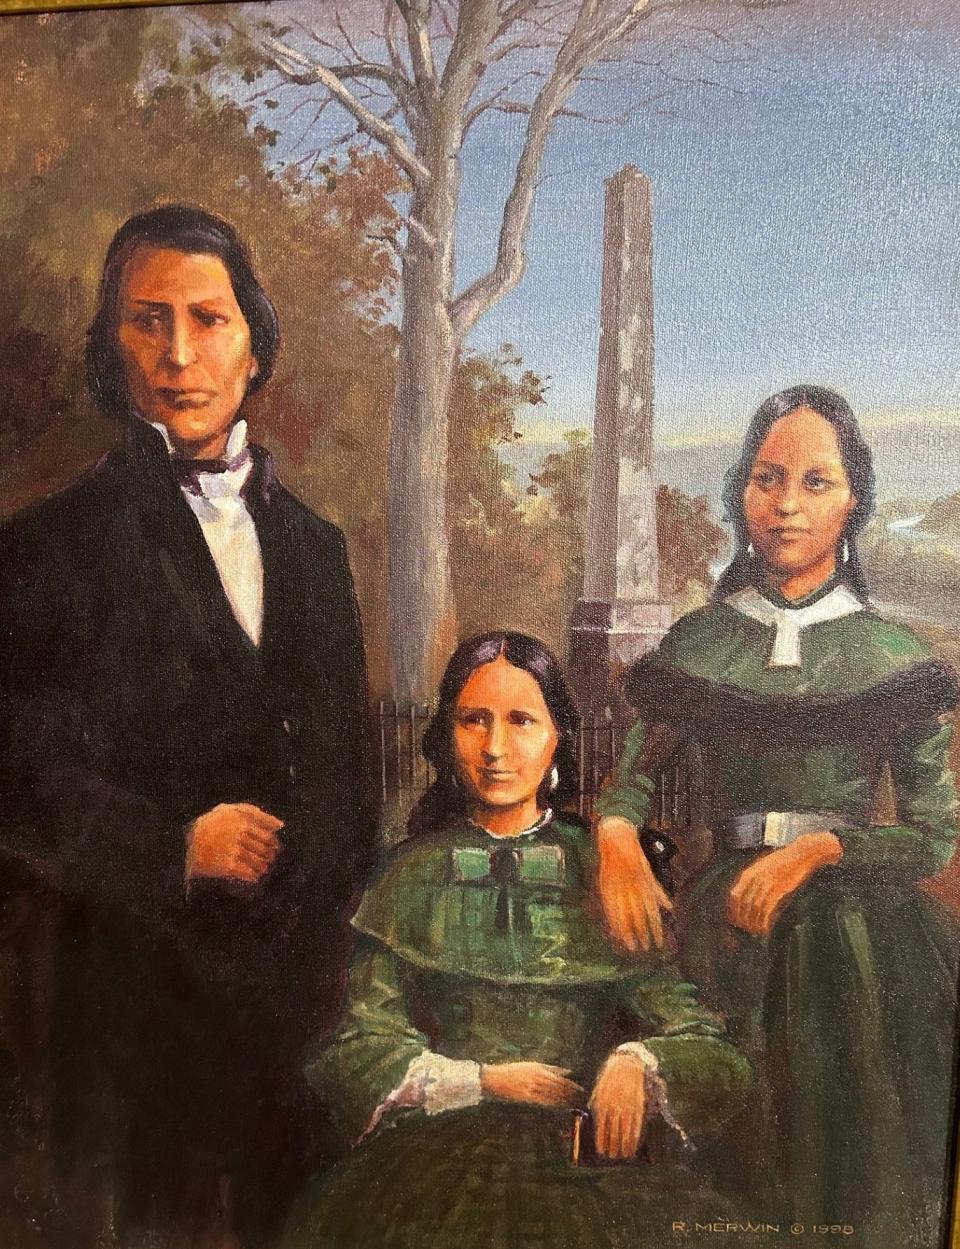 A portrait of the three Loft children by R. Merwin based on an old photo.